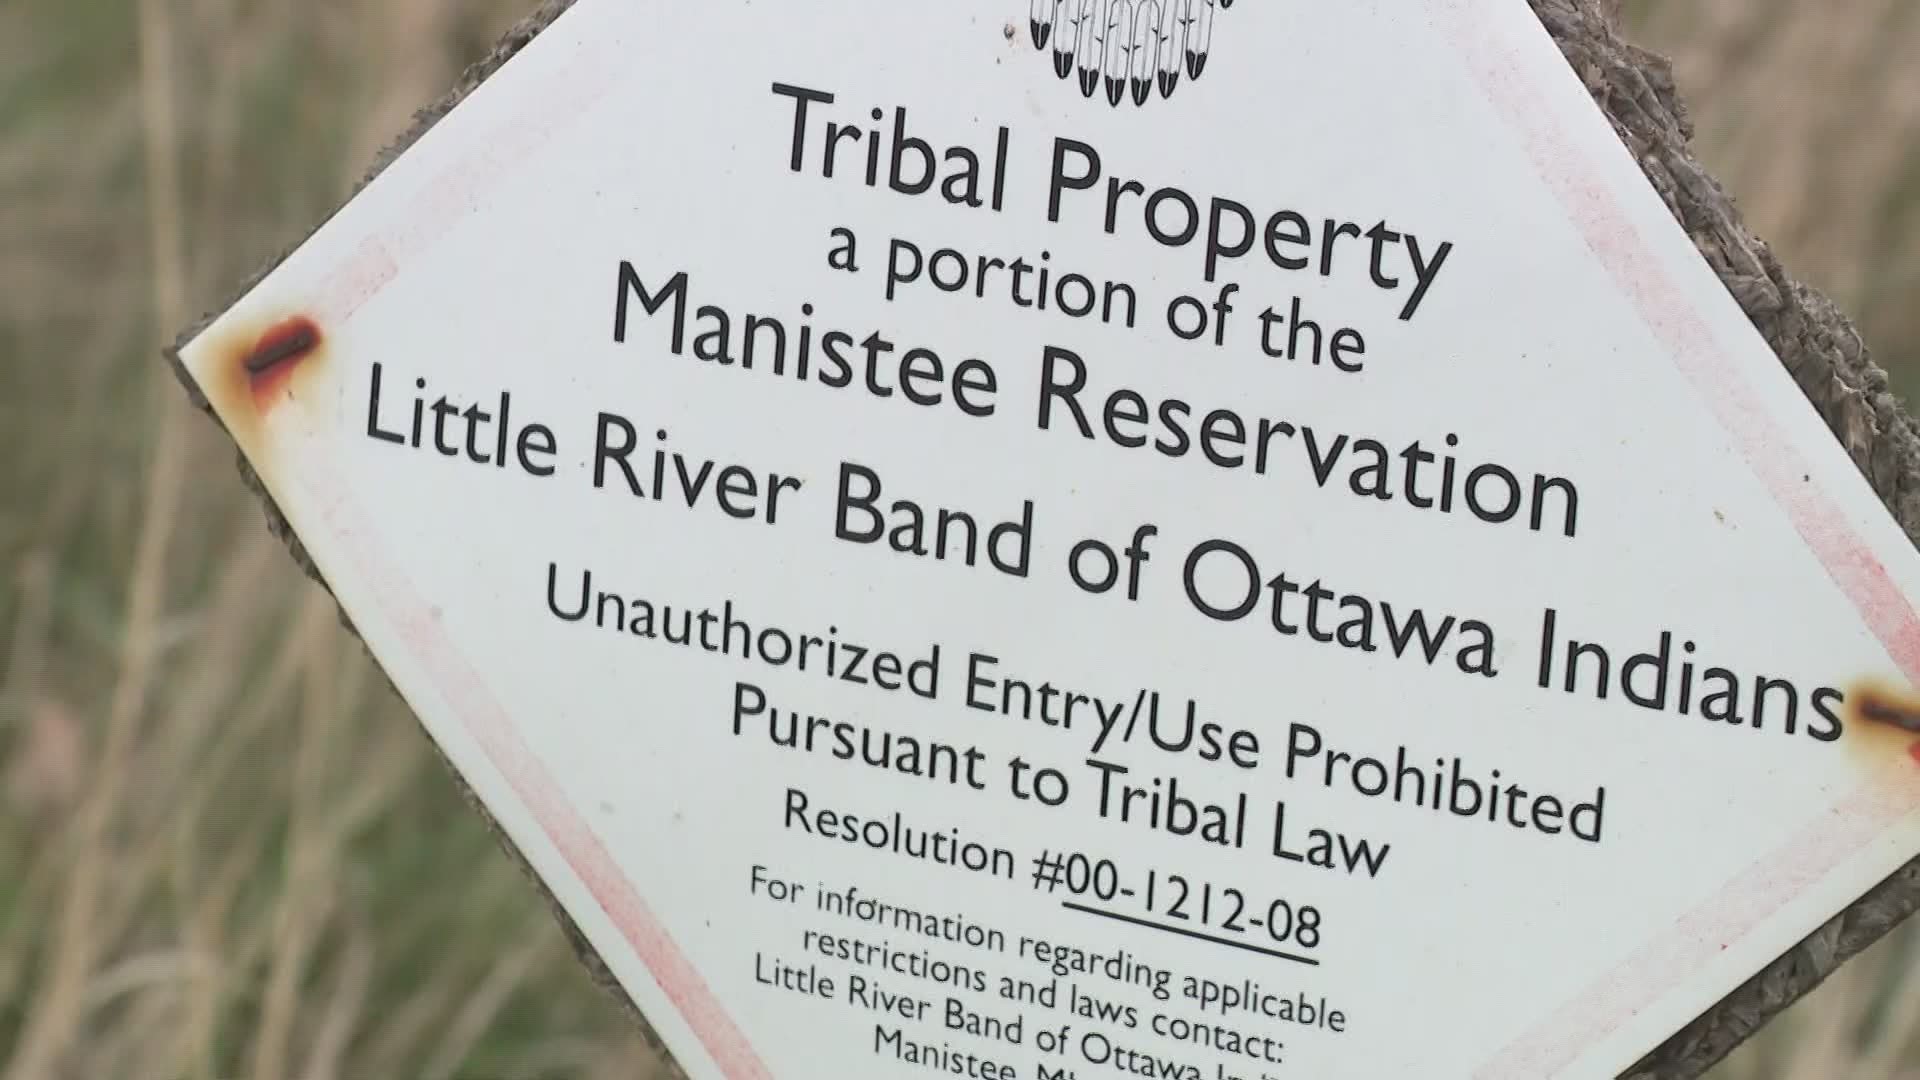 The Bureau of Indian Affairs is expected to close public comment on the Little River Band of Ottawa Indians' casino proposal in late November.